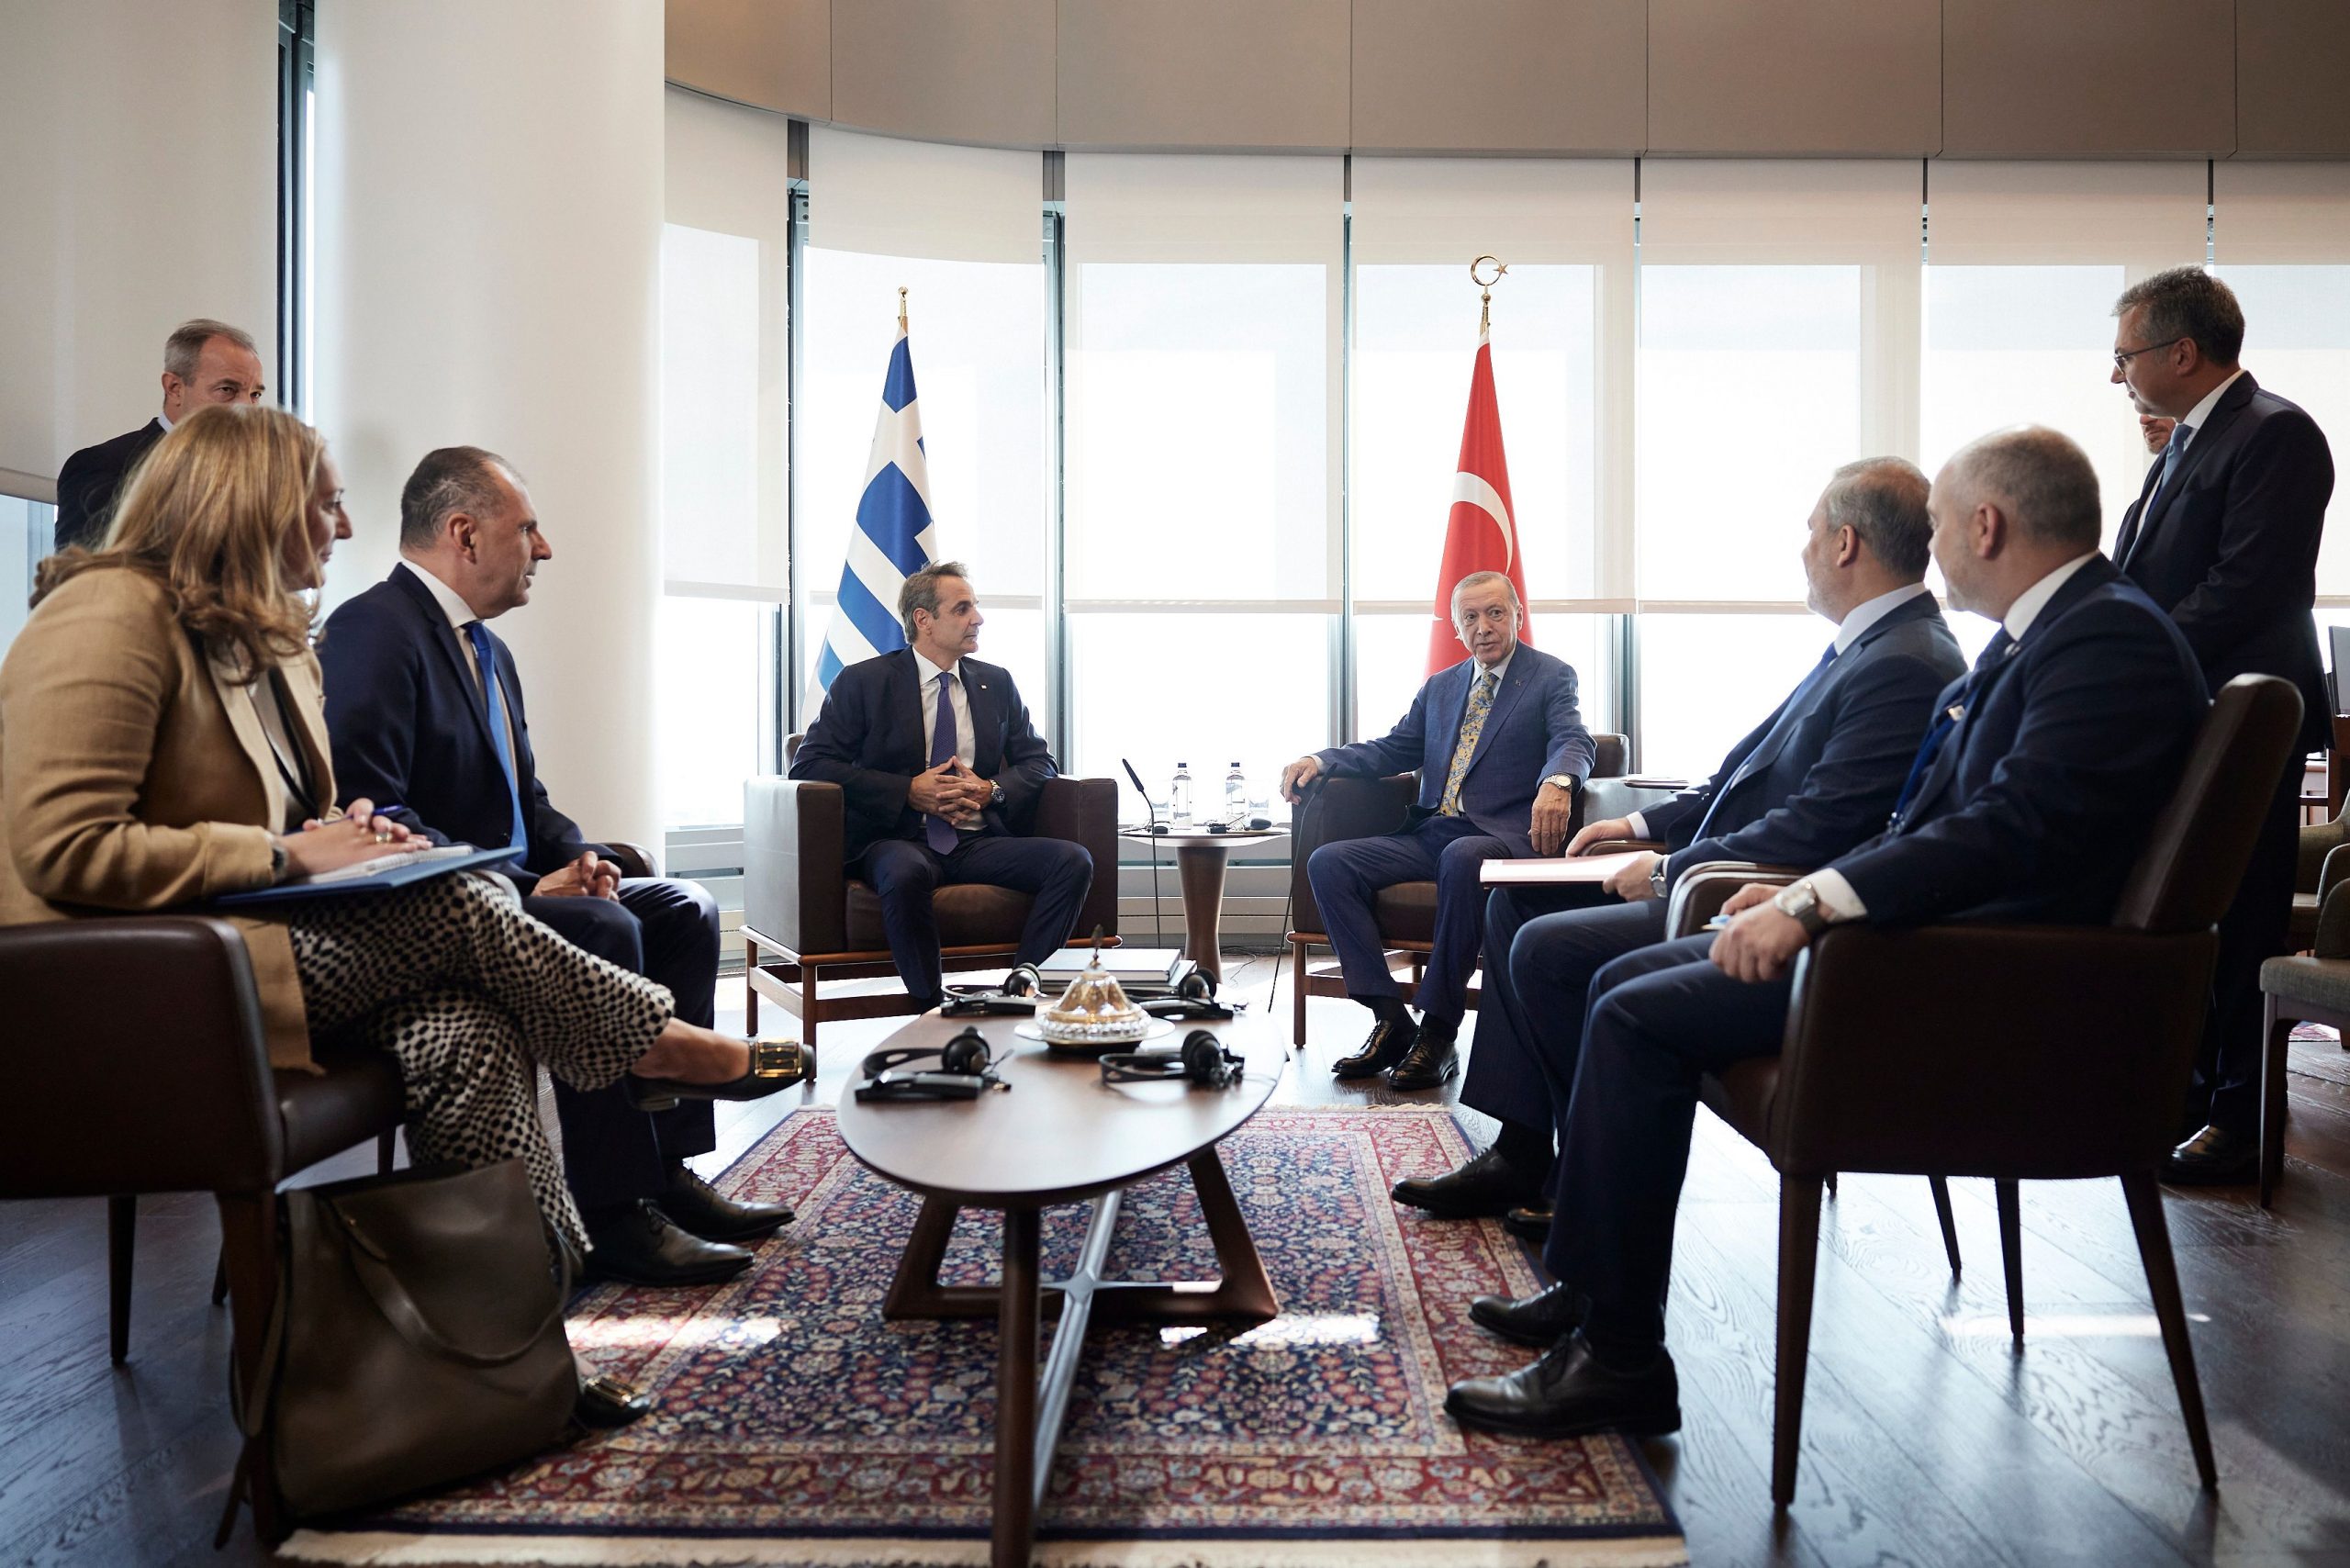 Mitsotakis-Erdogan meeting in NYC confirms ‘thaw’ in bilateral relations, emphasis on ‘positive agenda’, CBMs